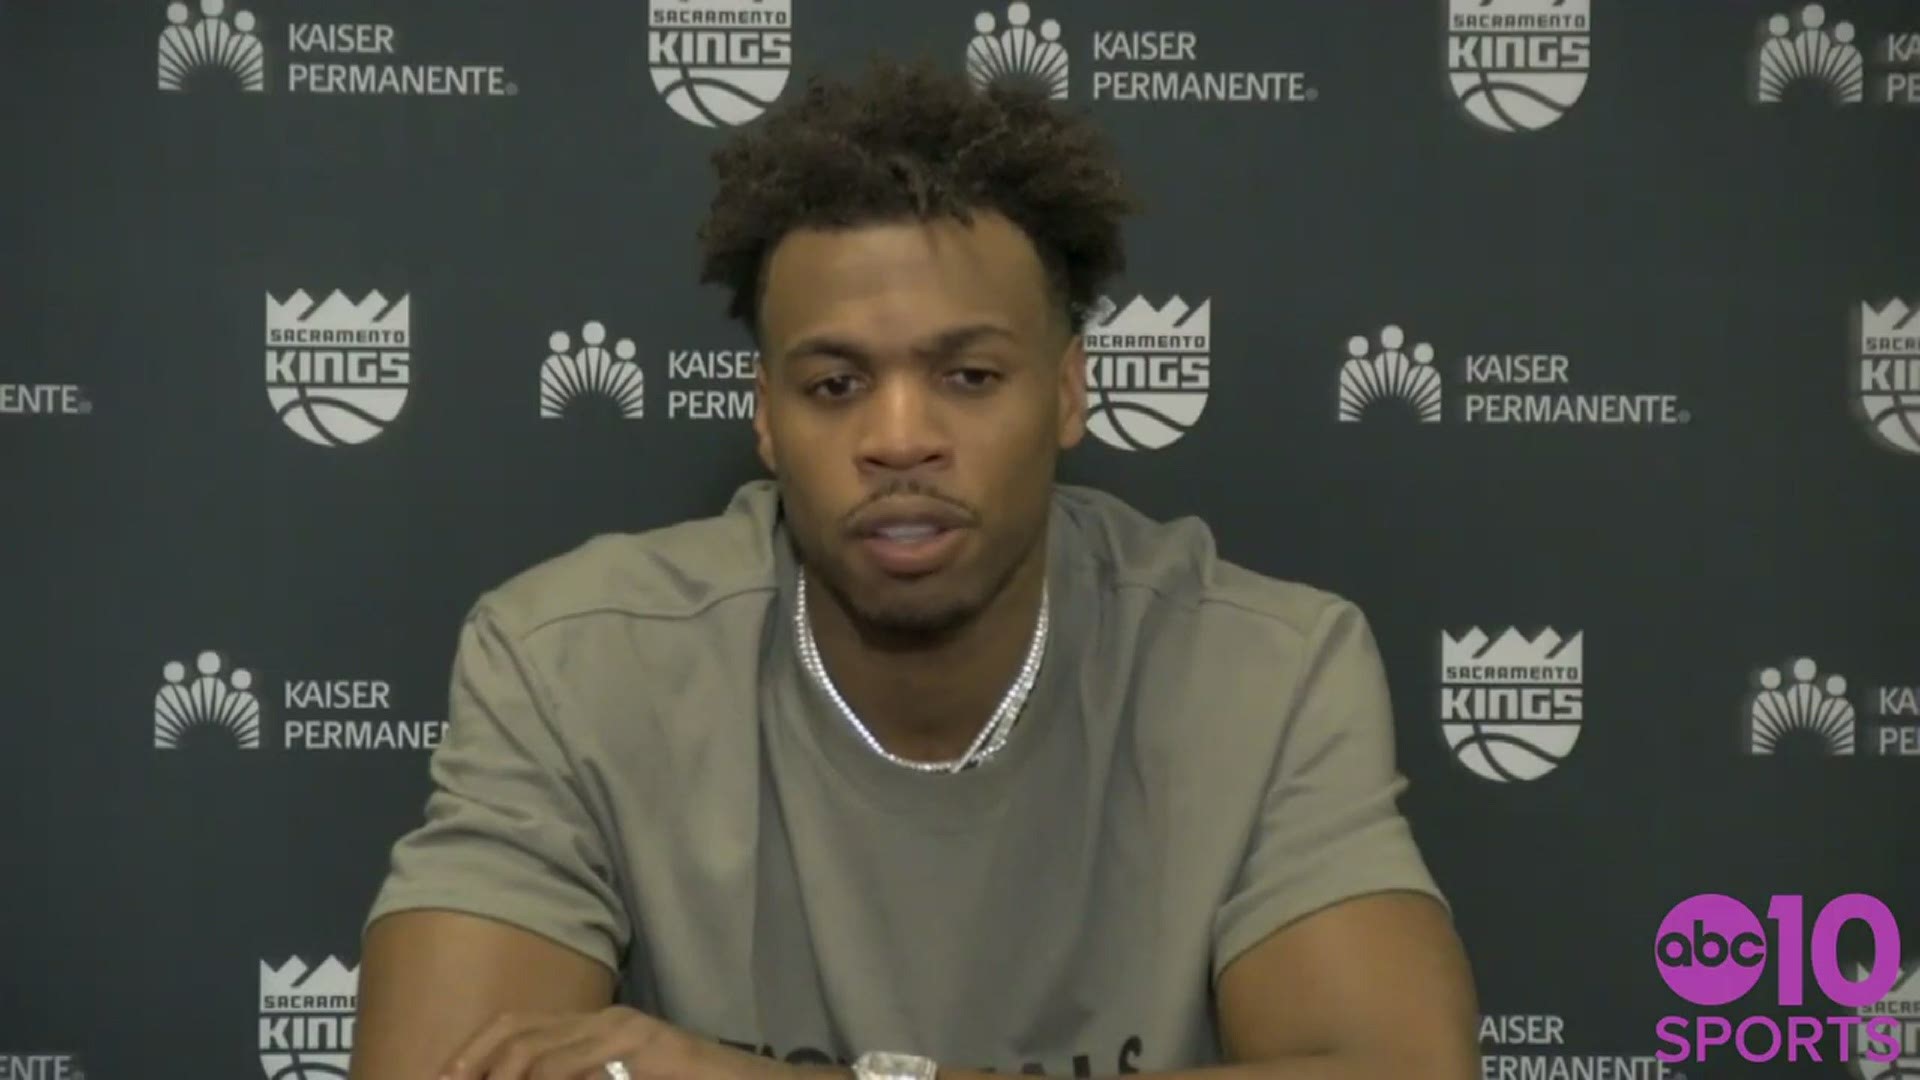 Buddy Hield says his Kings should have won Wednesday's game which was won 132-126 by the Portland Trail Blazers, thanks to a 40-point outing by Damian Lillard.